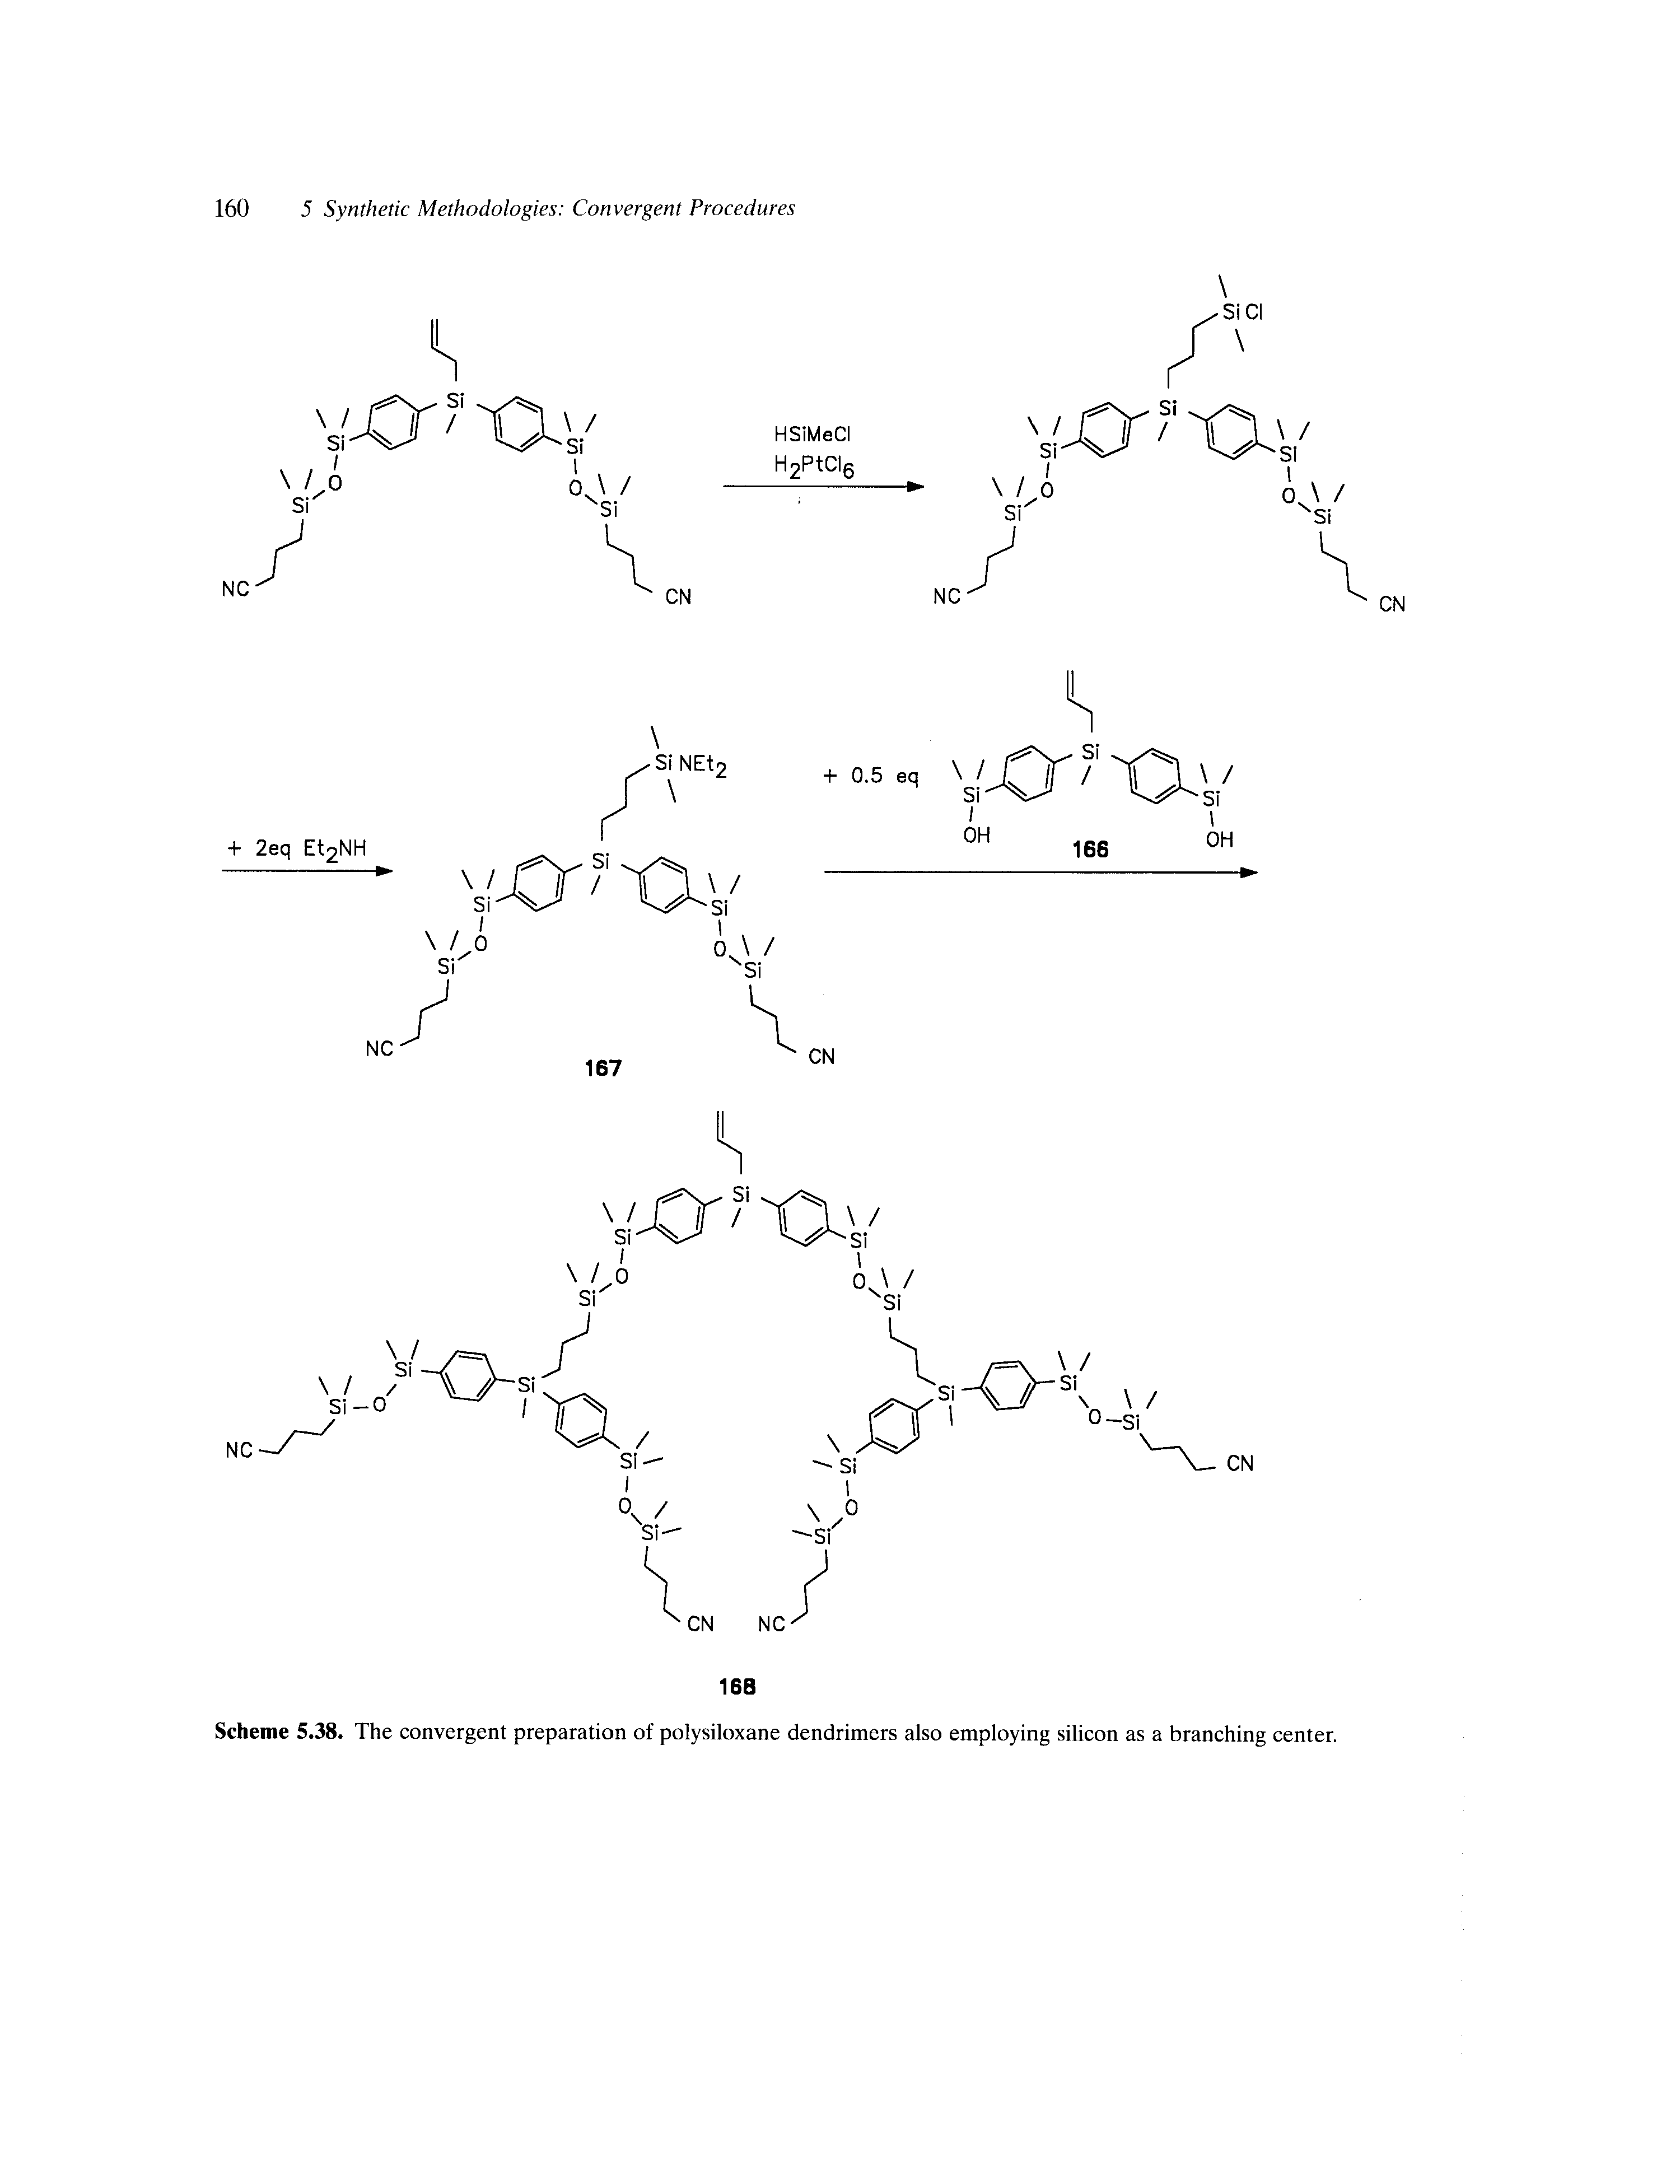 Scheme 5.38. The convergent preparation of polysiloxane dendrimers also employing silicon as a branching center.